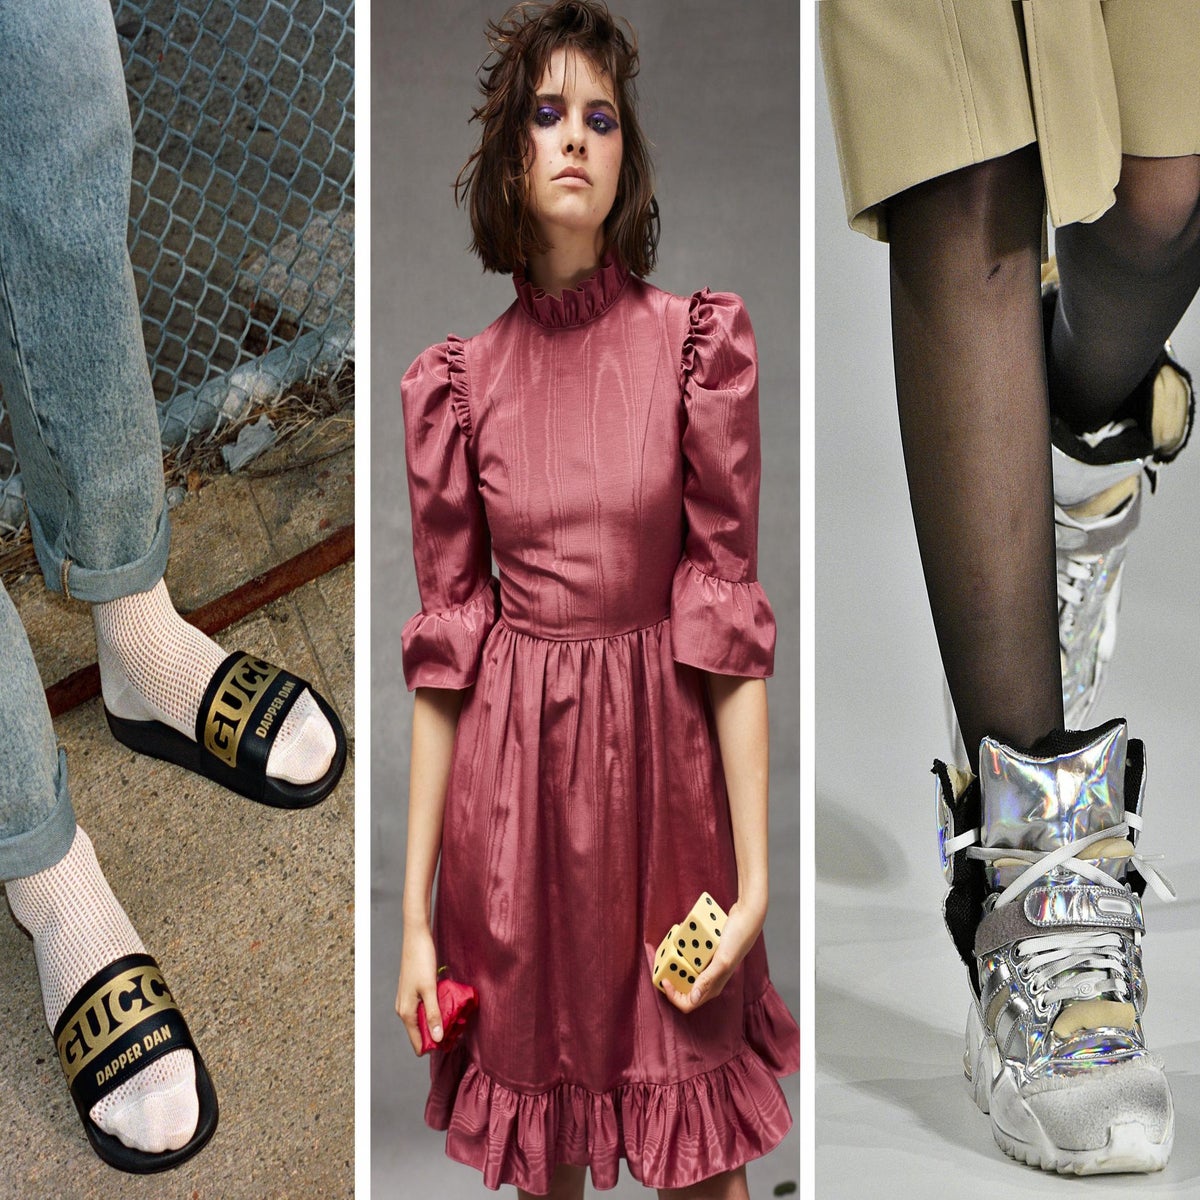 Crocs, bum bags and prairie dresses: how anti-fashion went mainstream, The  Independent